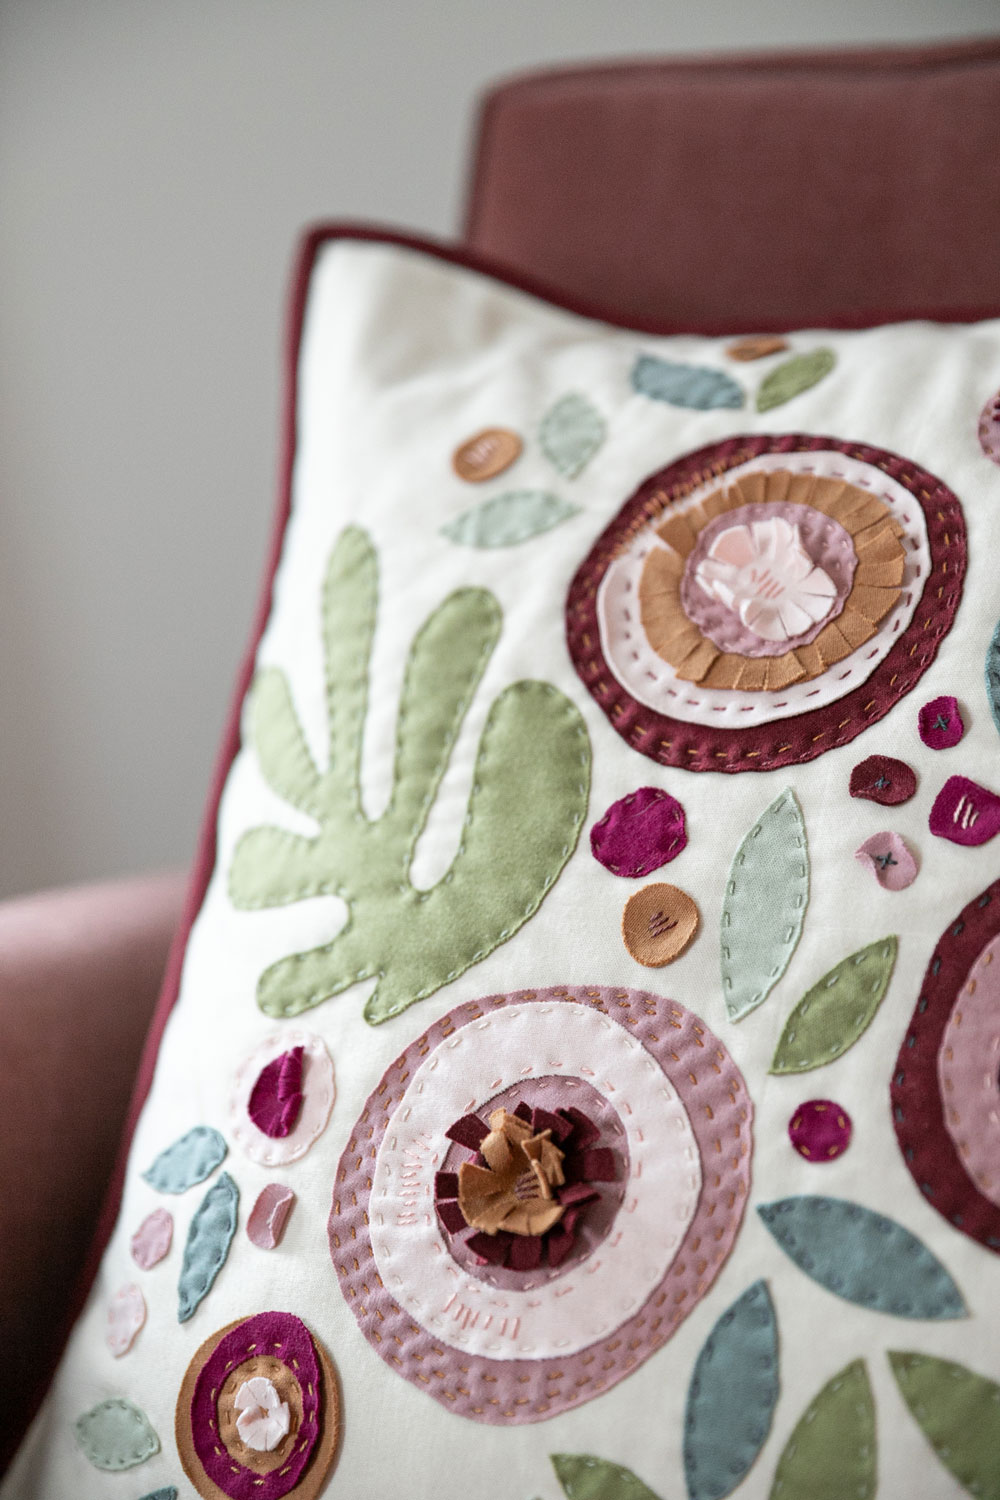 Make a modern appliqué pillow with knits! By using templates from the Bohemian Garden quilt pattern, you can create a buttery soft handmade pillow. suzyquilts.com #applique